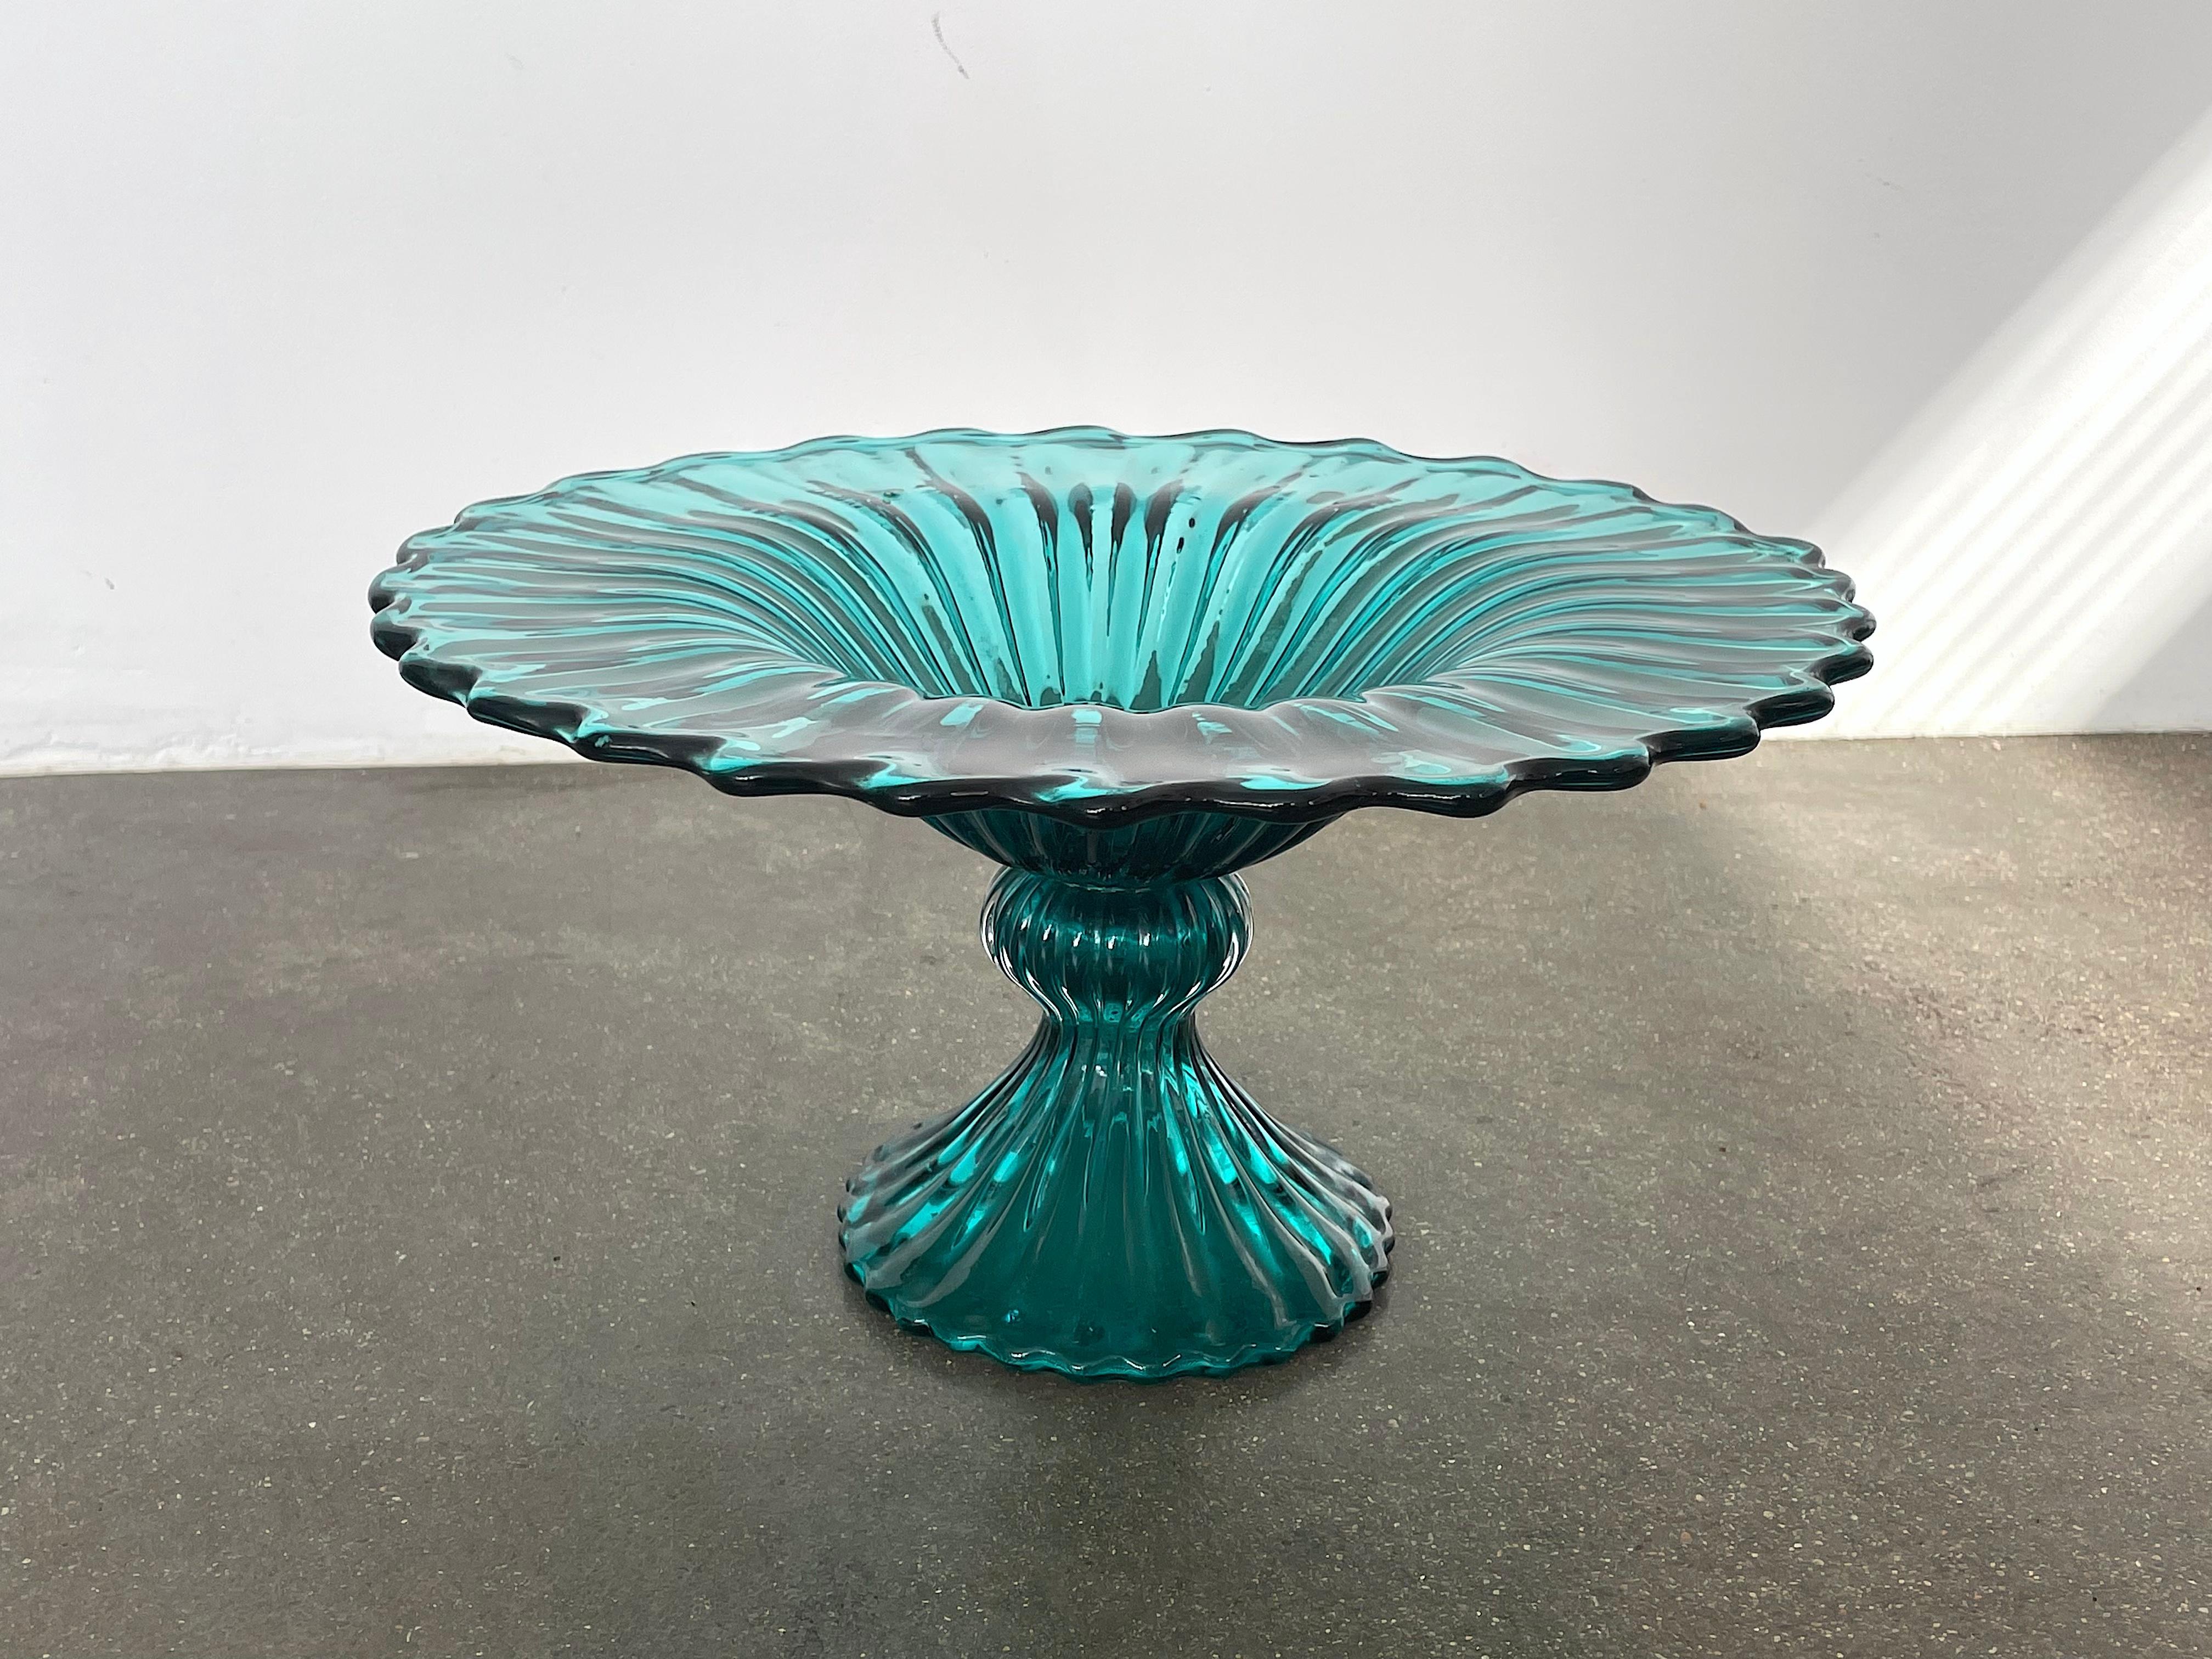 A 20th Century vintage Italian decorative centerpiece or fruit dish made out of handblown blue/green Venetian Murano glass. Designed with a beautiful twisted spiral pedestal base. 
Italy. Circa 1970's

---------
We are an exhibition space and an